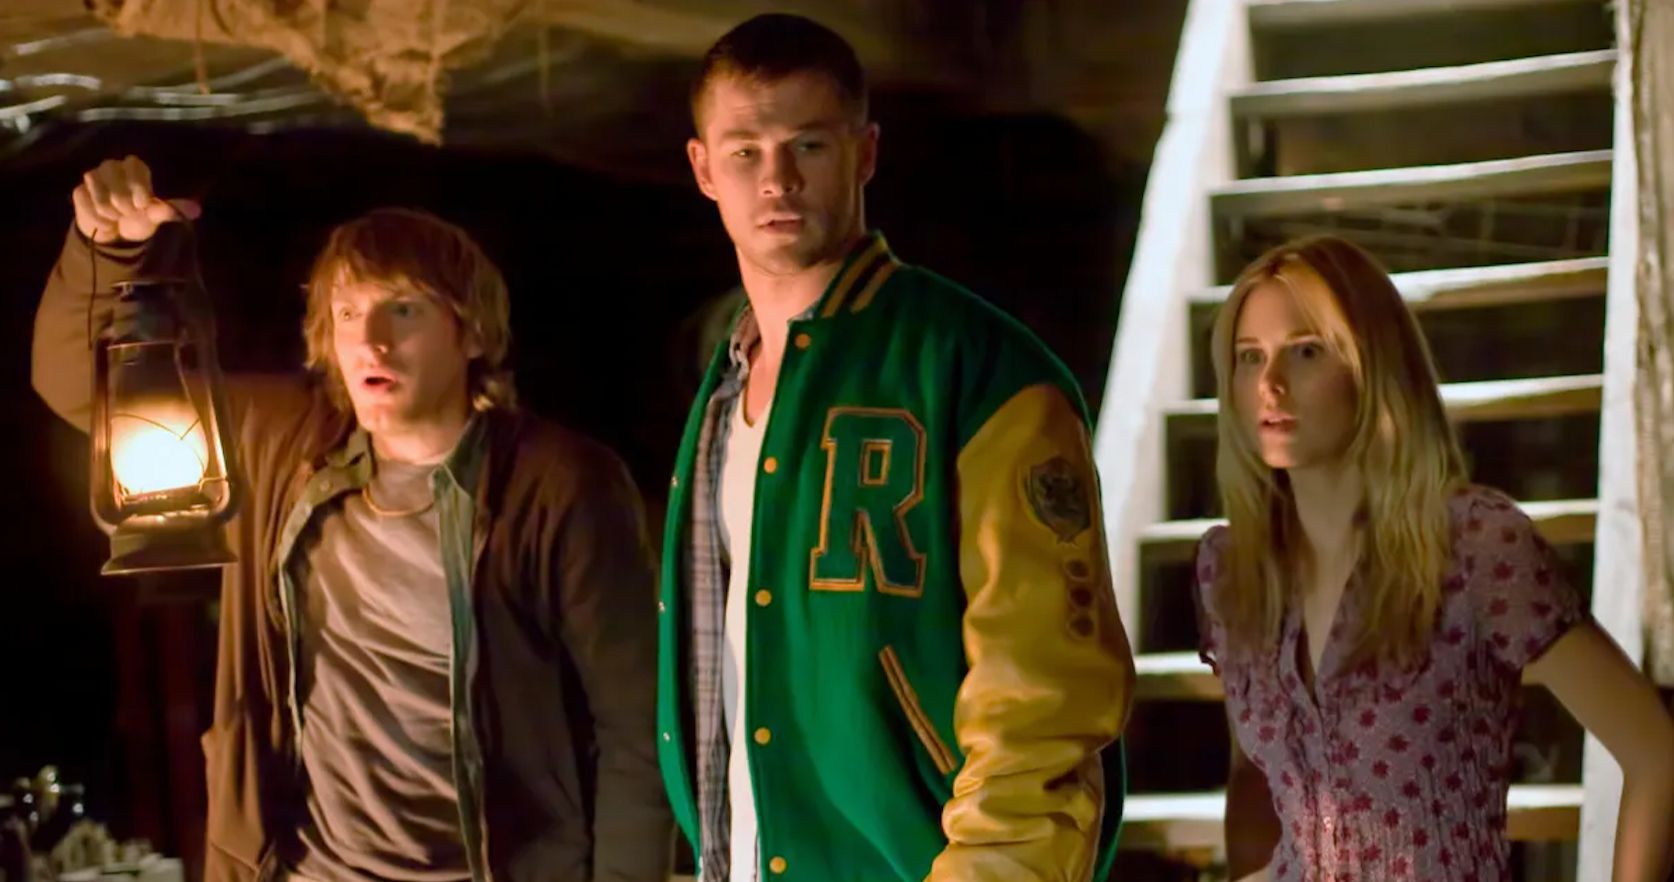 10 Scary Facts About The Cabin in the Woods That Most Horror Fans Don't Know